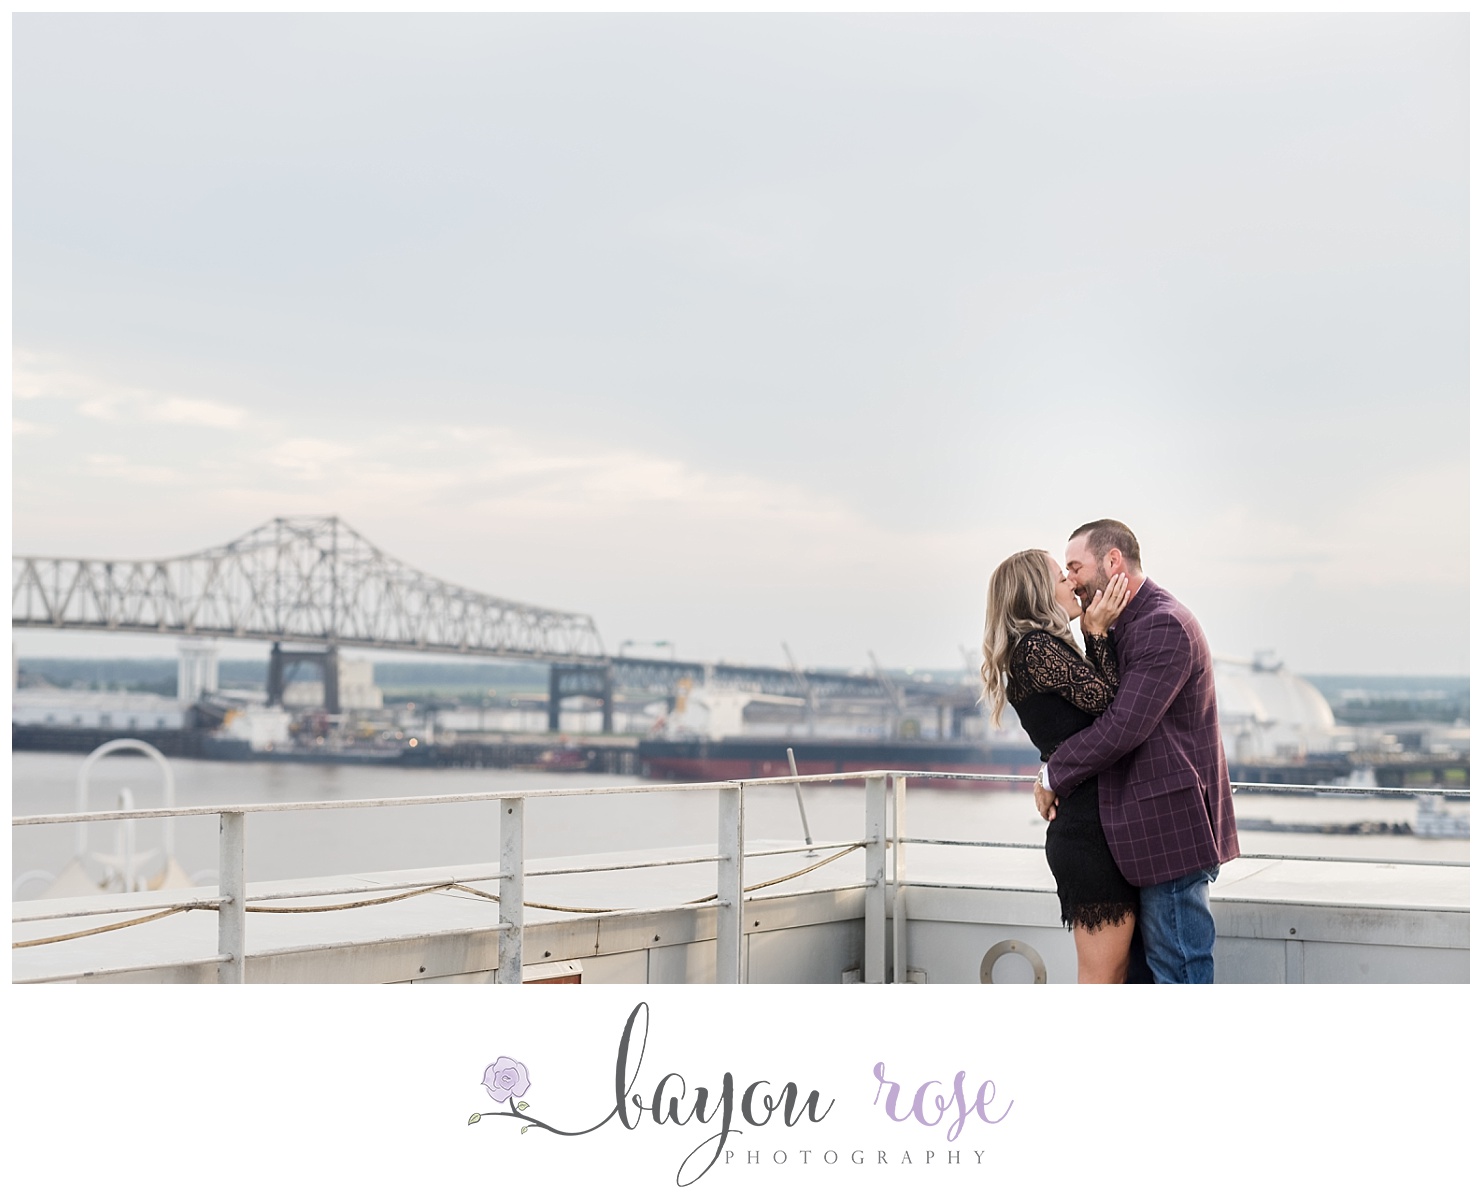 Proposal photography session in Baton Rouge with Mississippi bridge in background